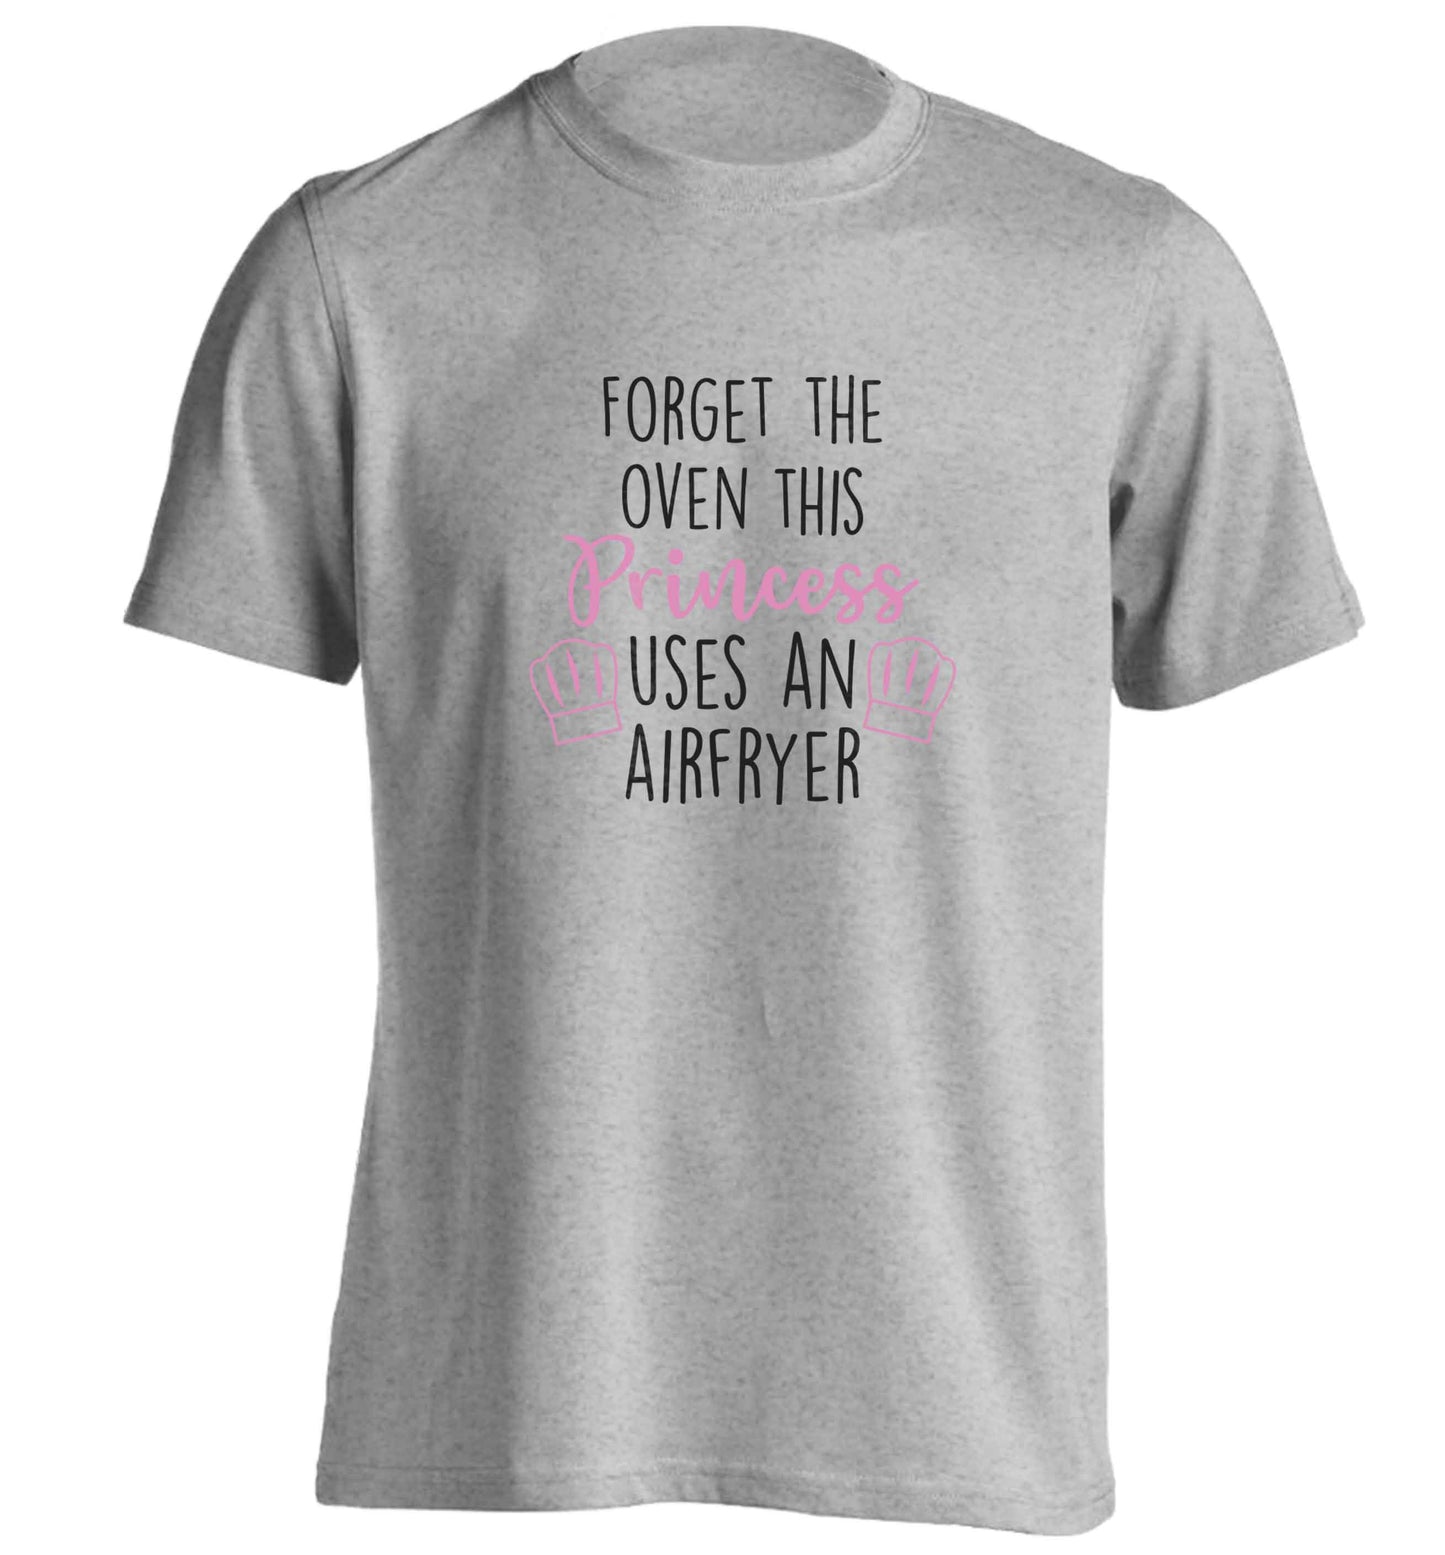 Forget the oven this princess uses an airfryeradults unisex grey Tshirt 2XL